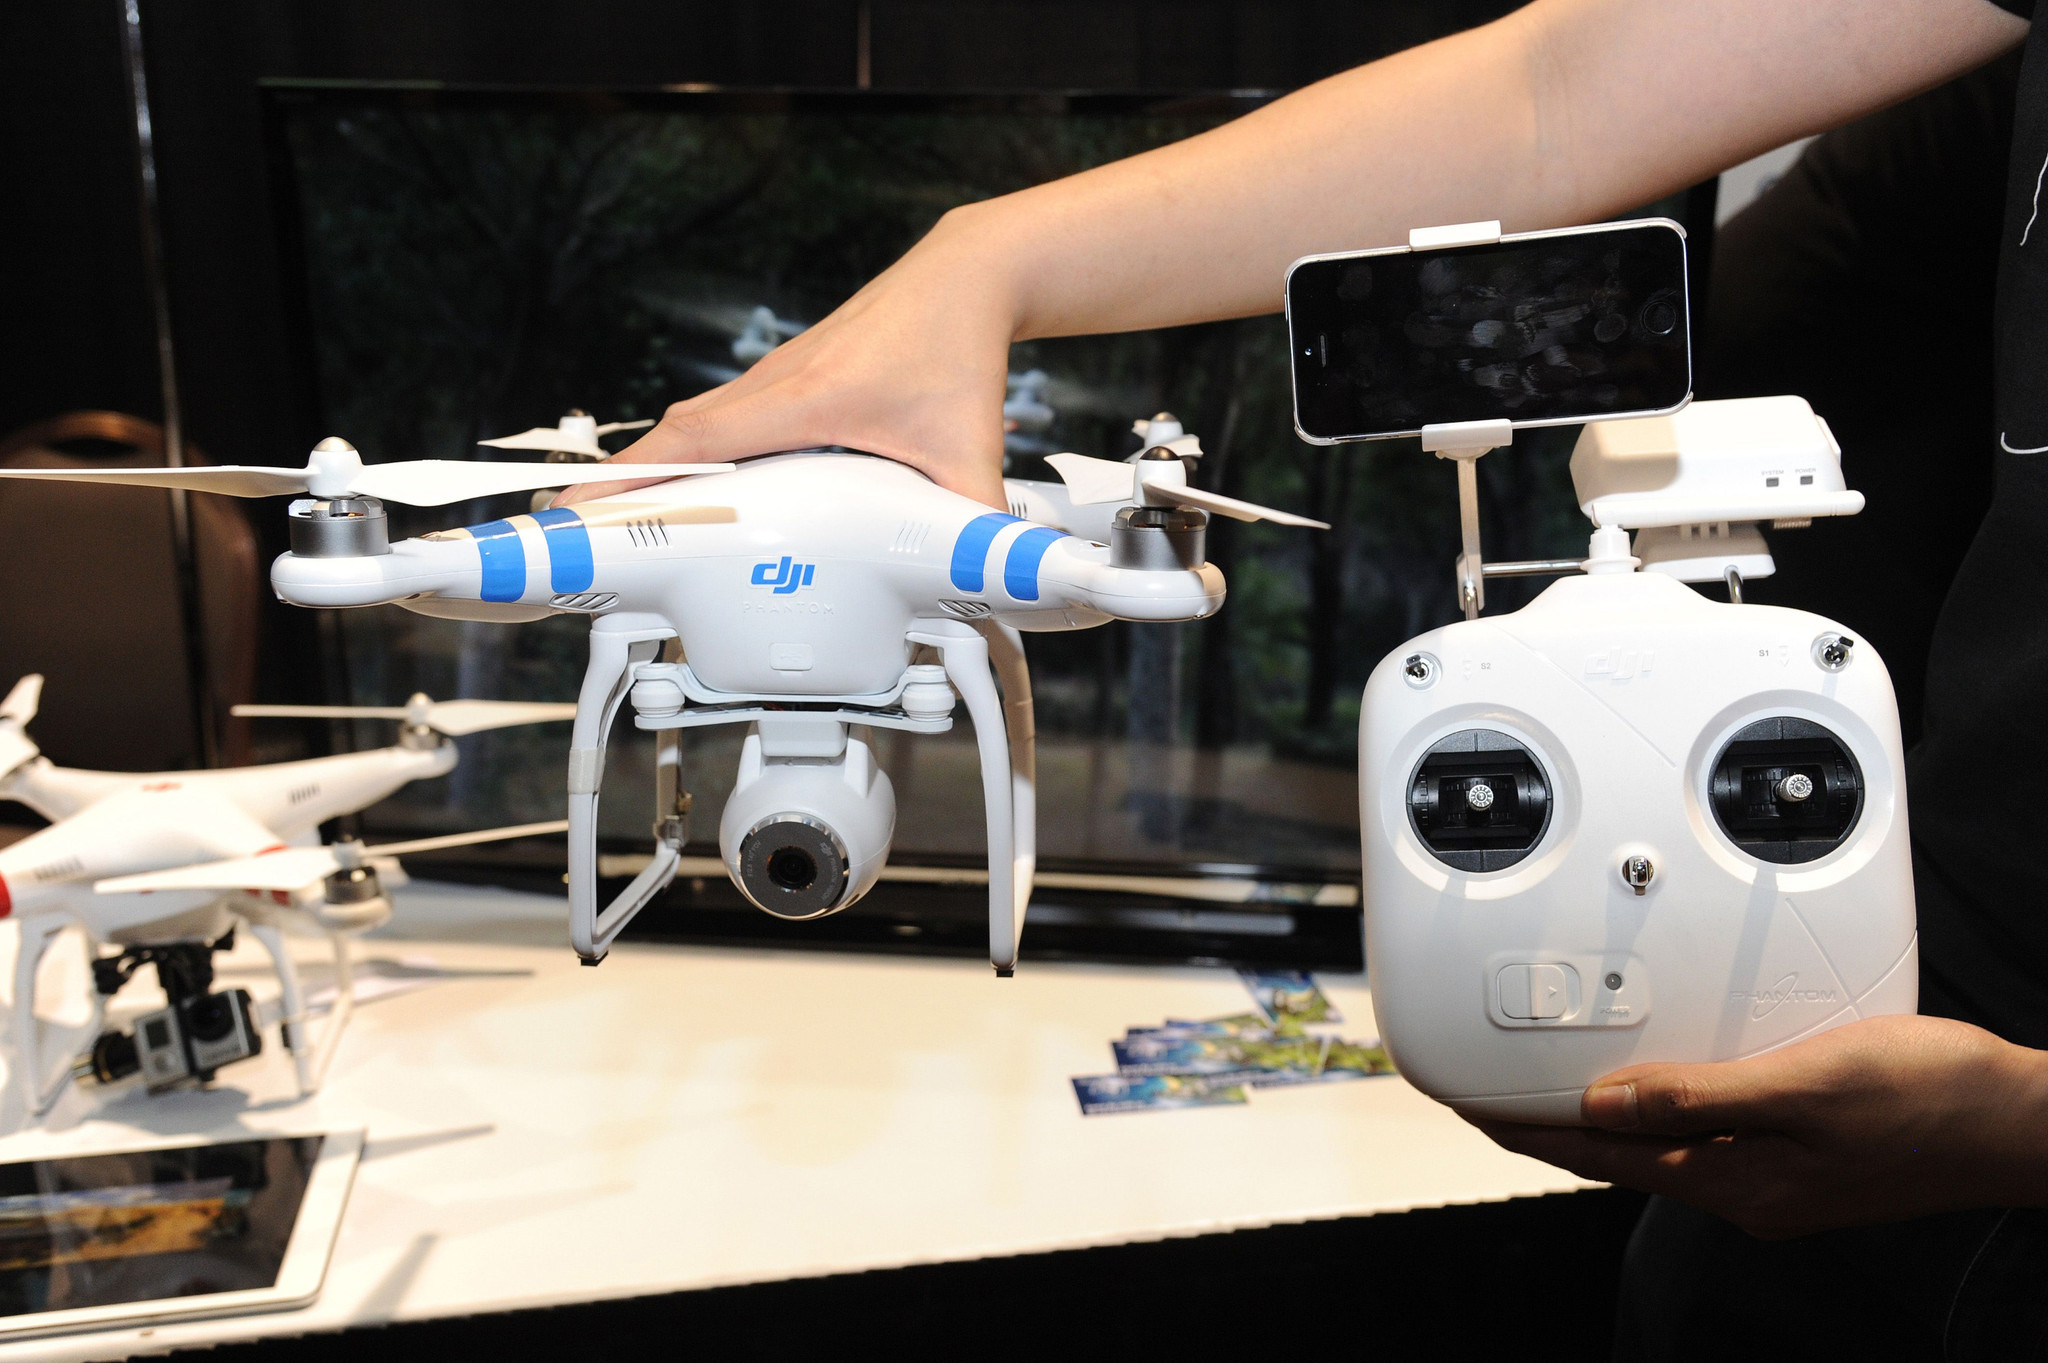 What You Missed: 6 Innovative Highlights Of CES 2014